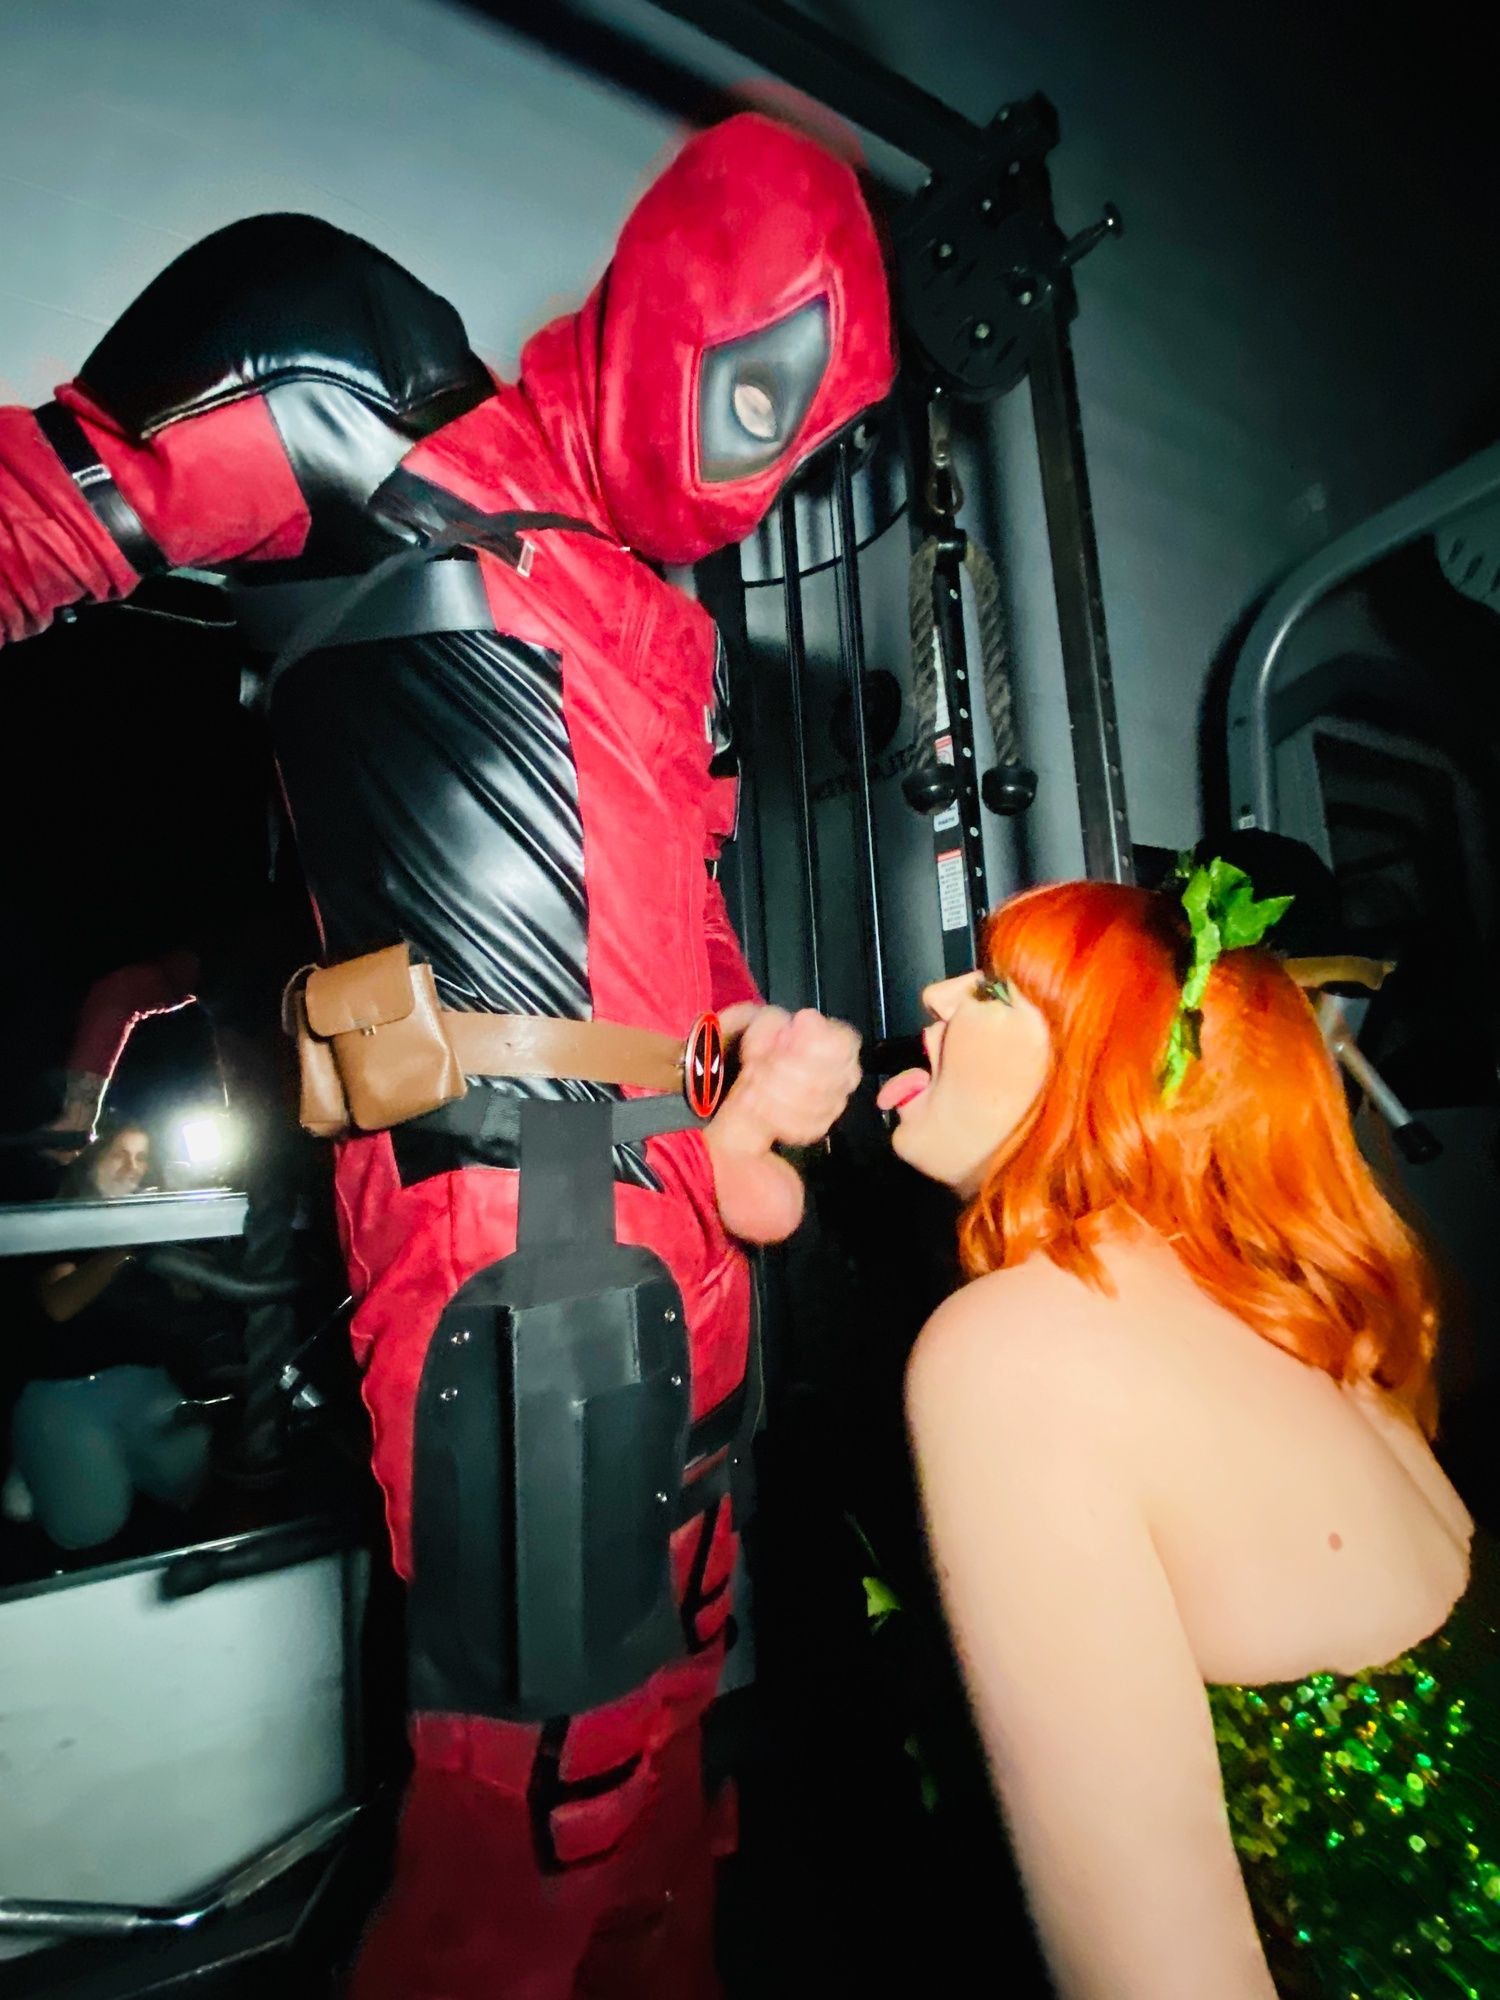 GYM LOCKER ROOM SEX with Poison Ivy & Deadpool (HOT) #11